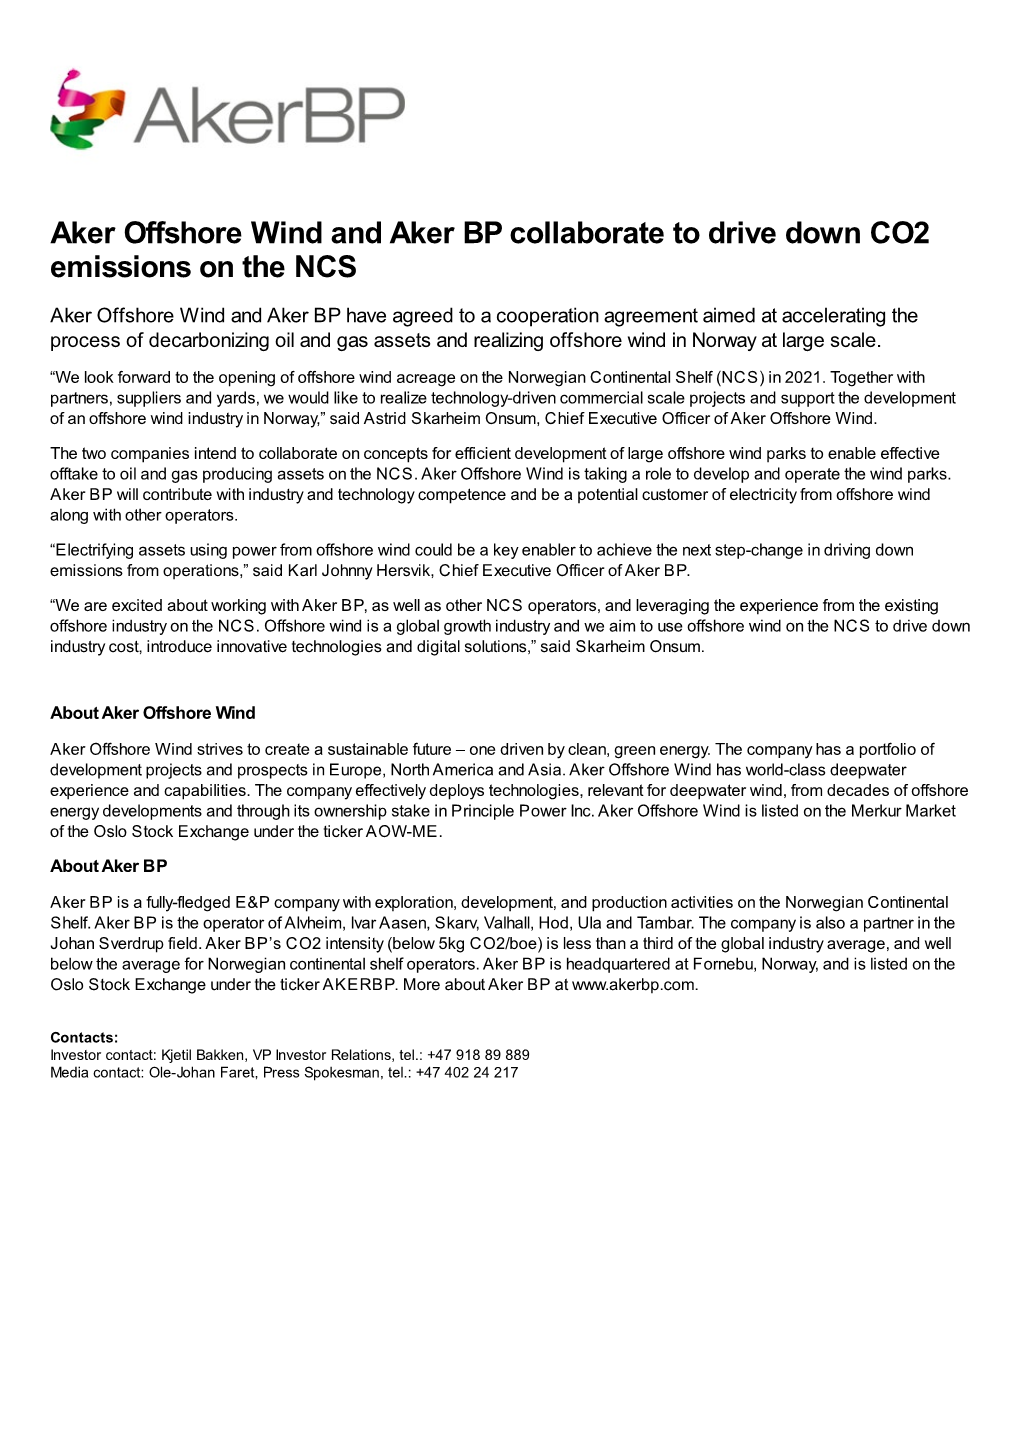 Aker Offshore Wind and Aker BP Collaborate to Drive Down CO2